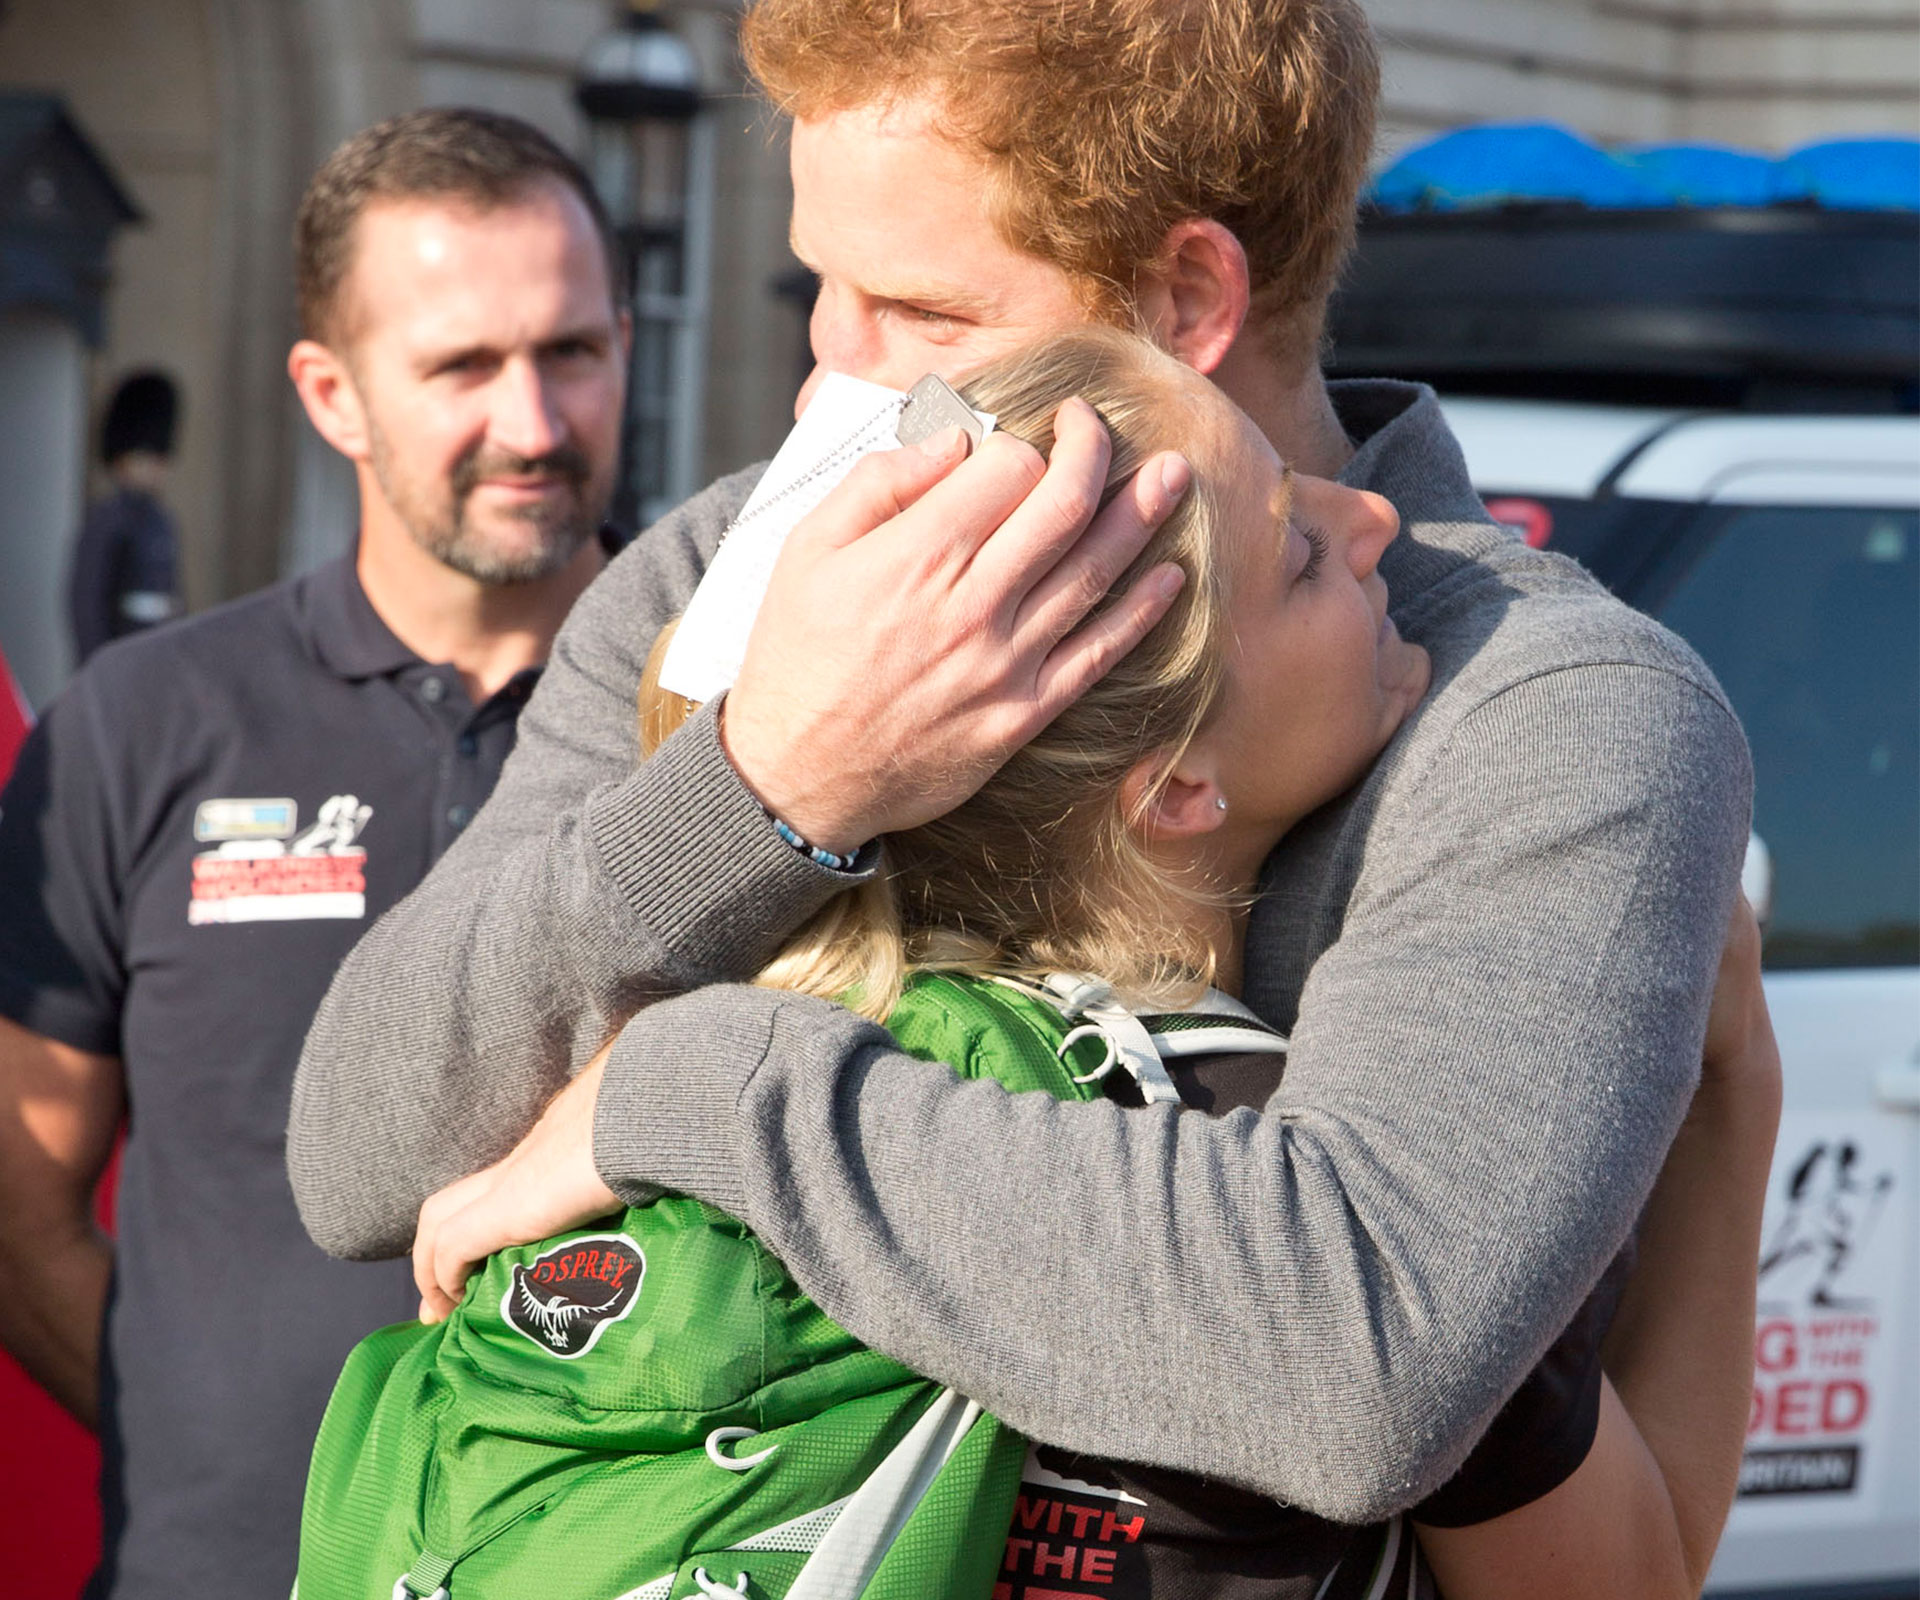 Prince Harry’s emotional moment with injured veteran